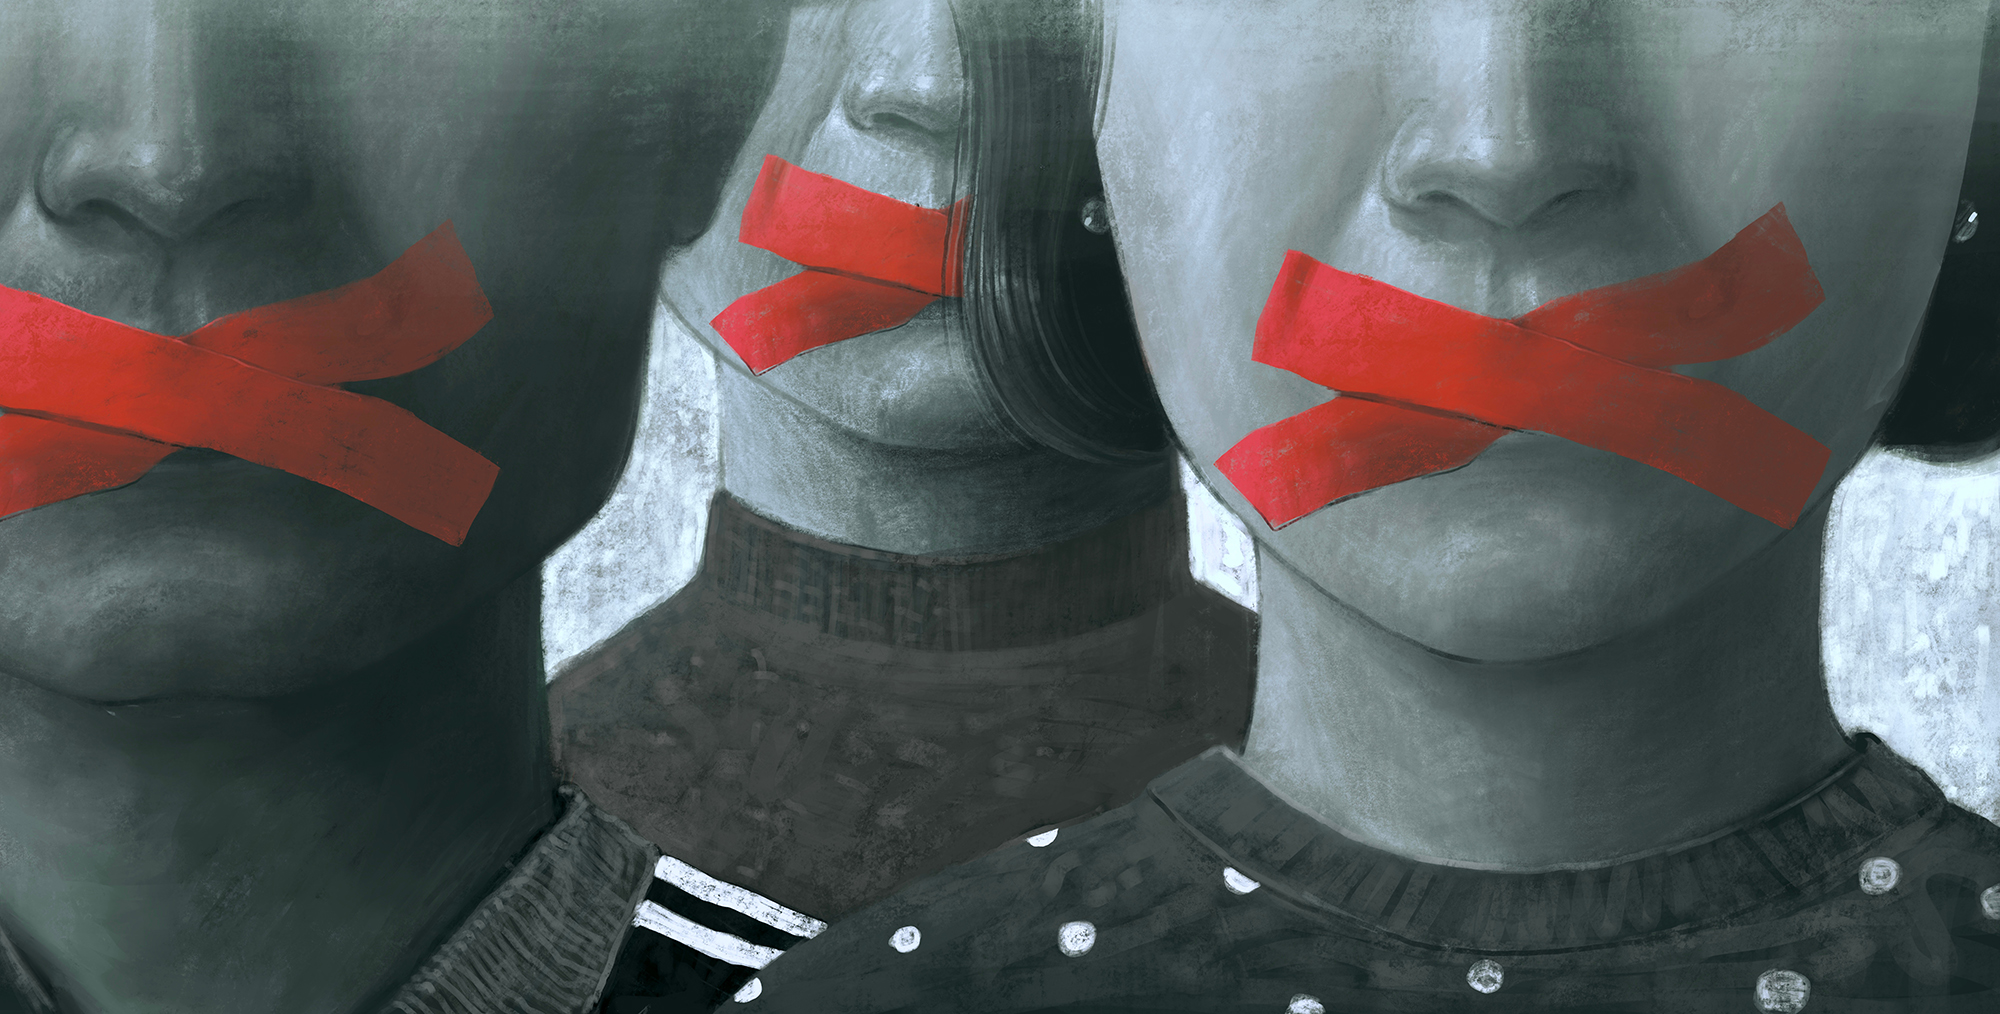 Red tape over mouths, preventing speech